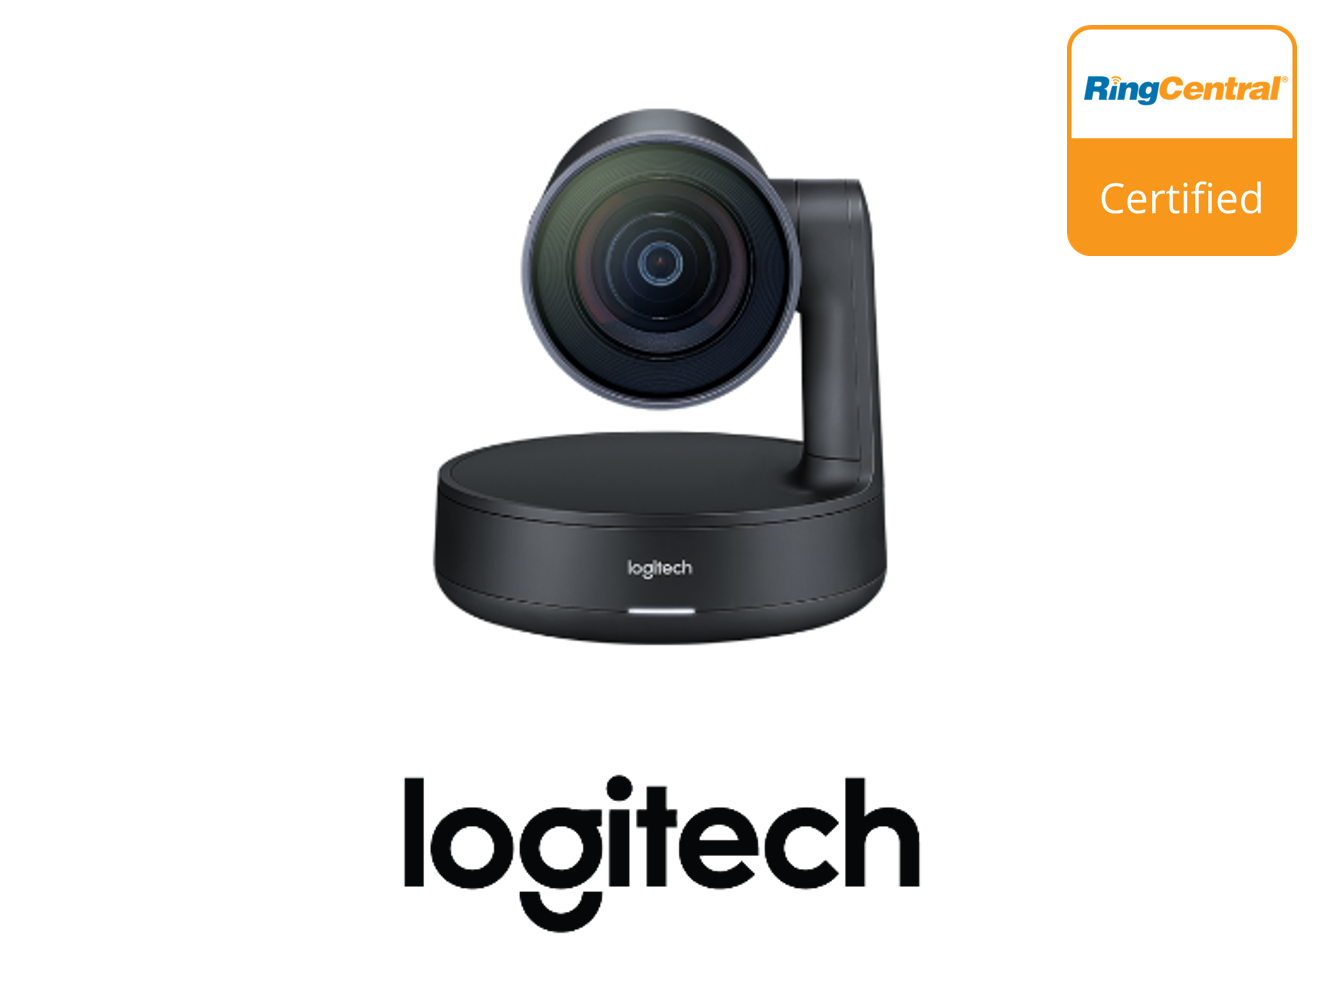 Logitech Rally Camera Certified by RingCentral